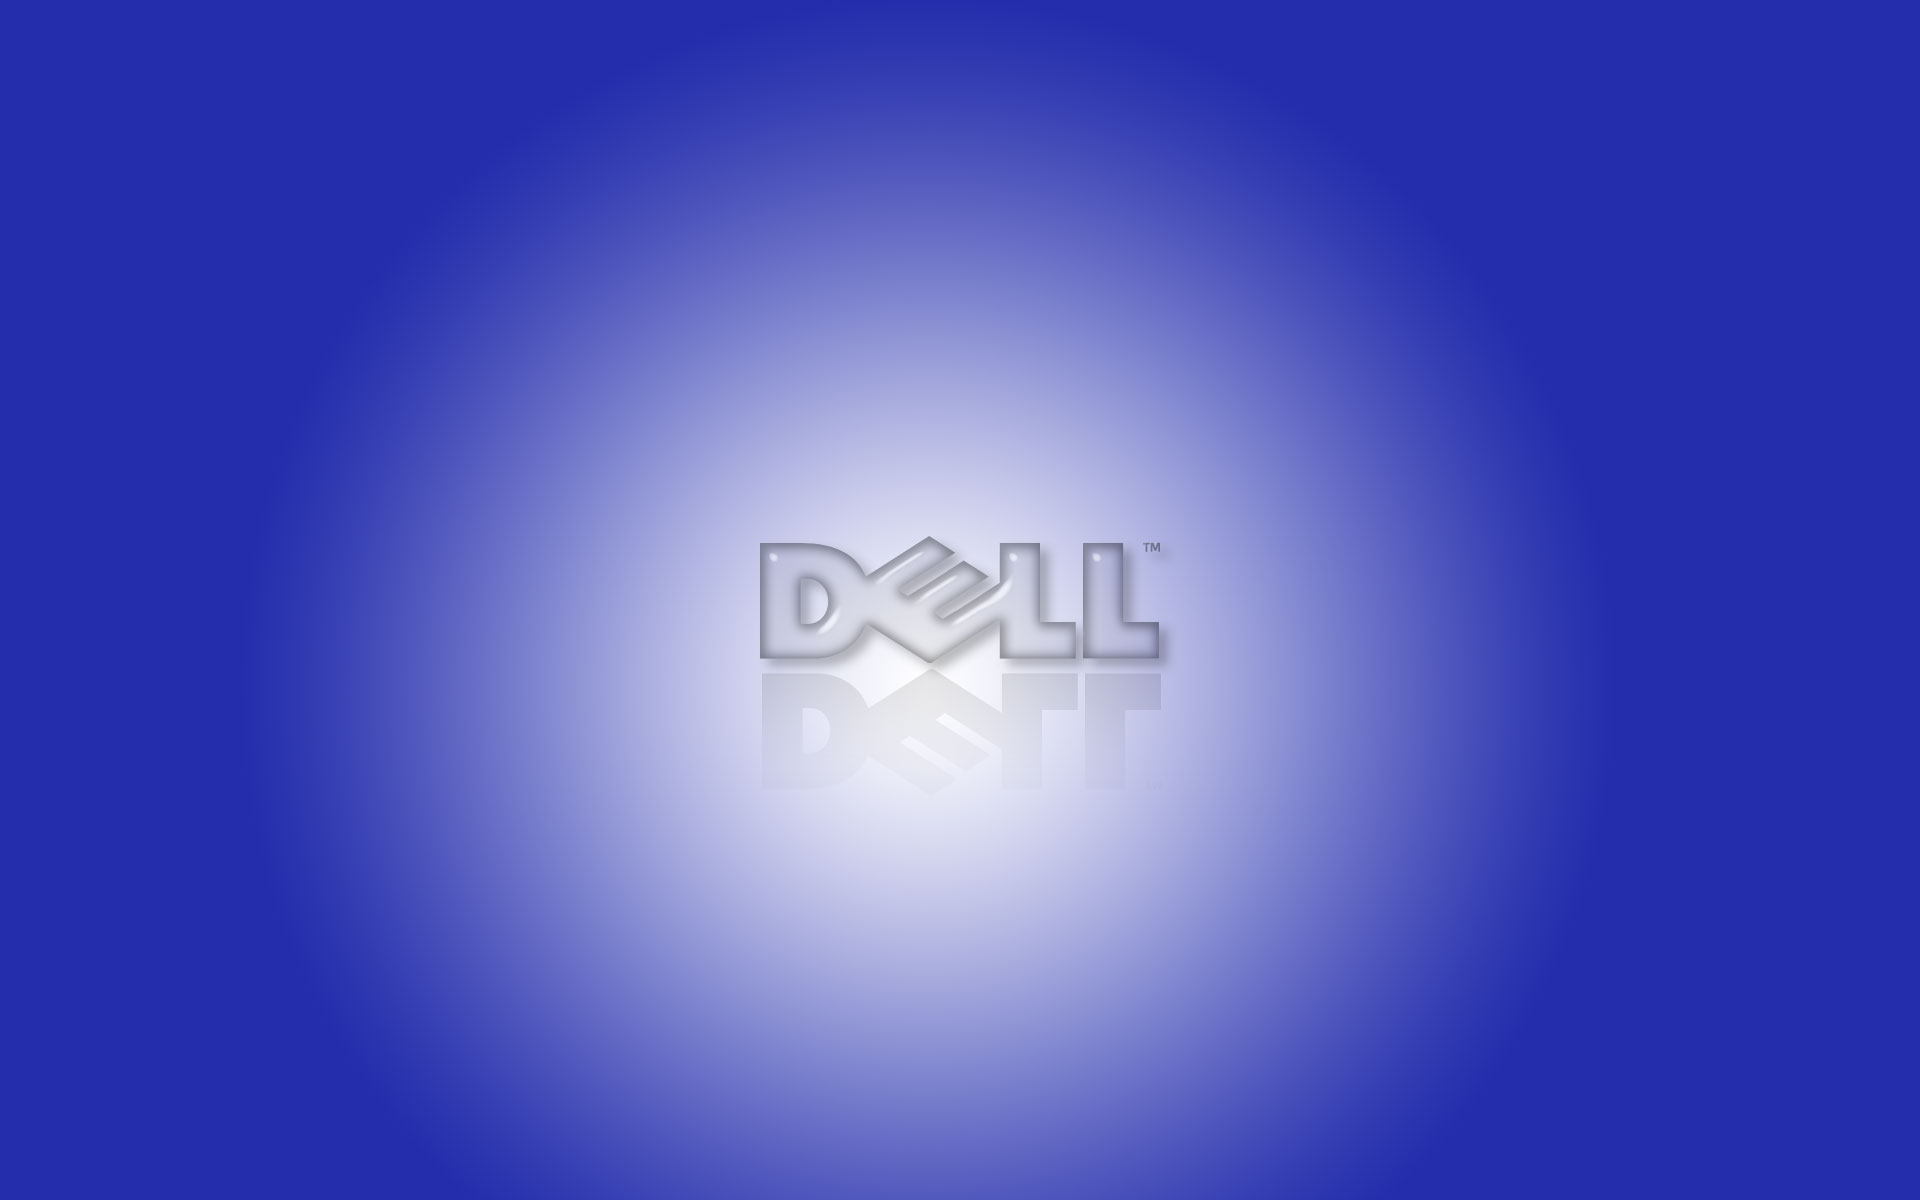 Free Download Dell Wallpaper Resolution Views Image Size Pictures 19x10 For Your Desktop Mobile Tablet Explore 50 Dell Venue 8 Pro Wallpaper Dell Venue 8 Pro Wallpaper Dell Wallpaper Windows 8 Windows 8 Pro Wallpaper